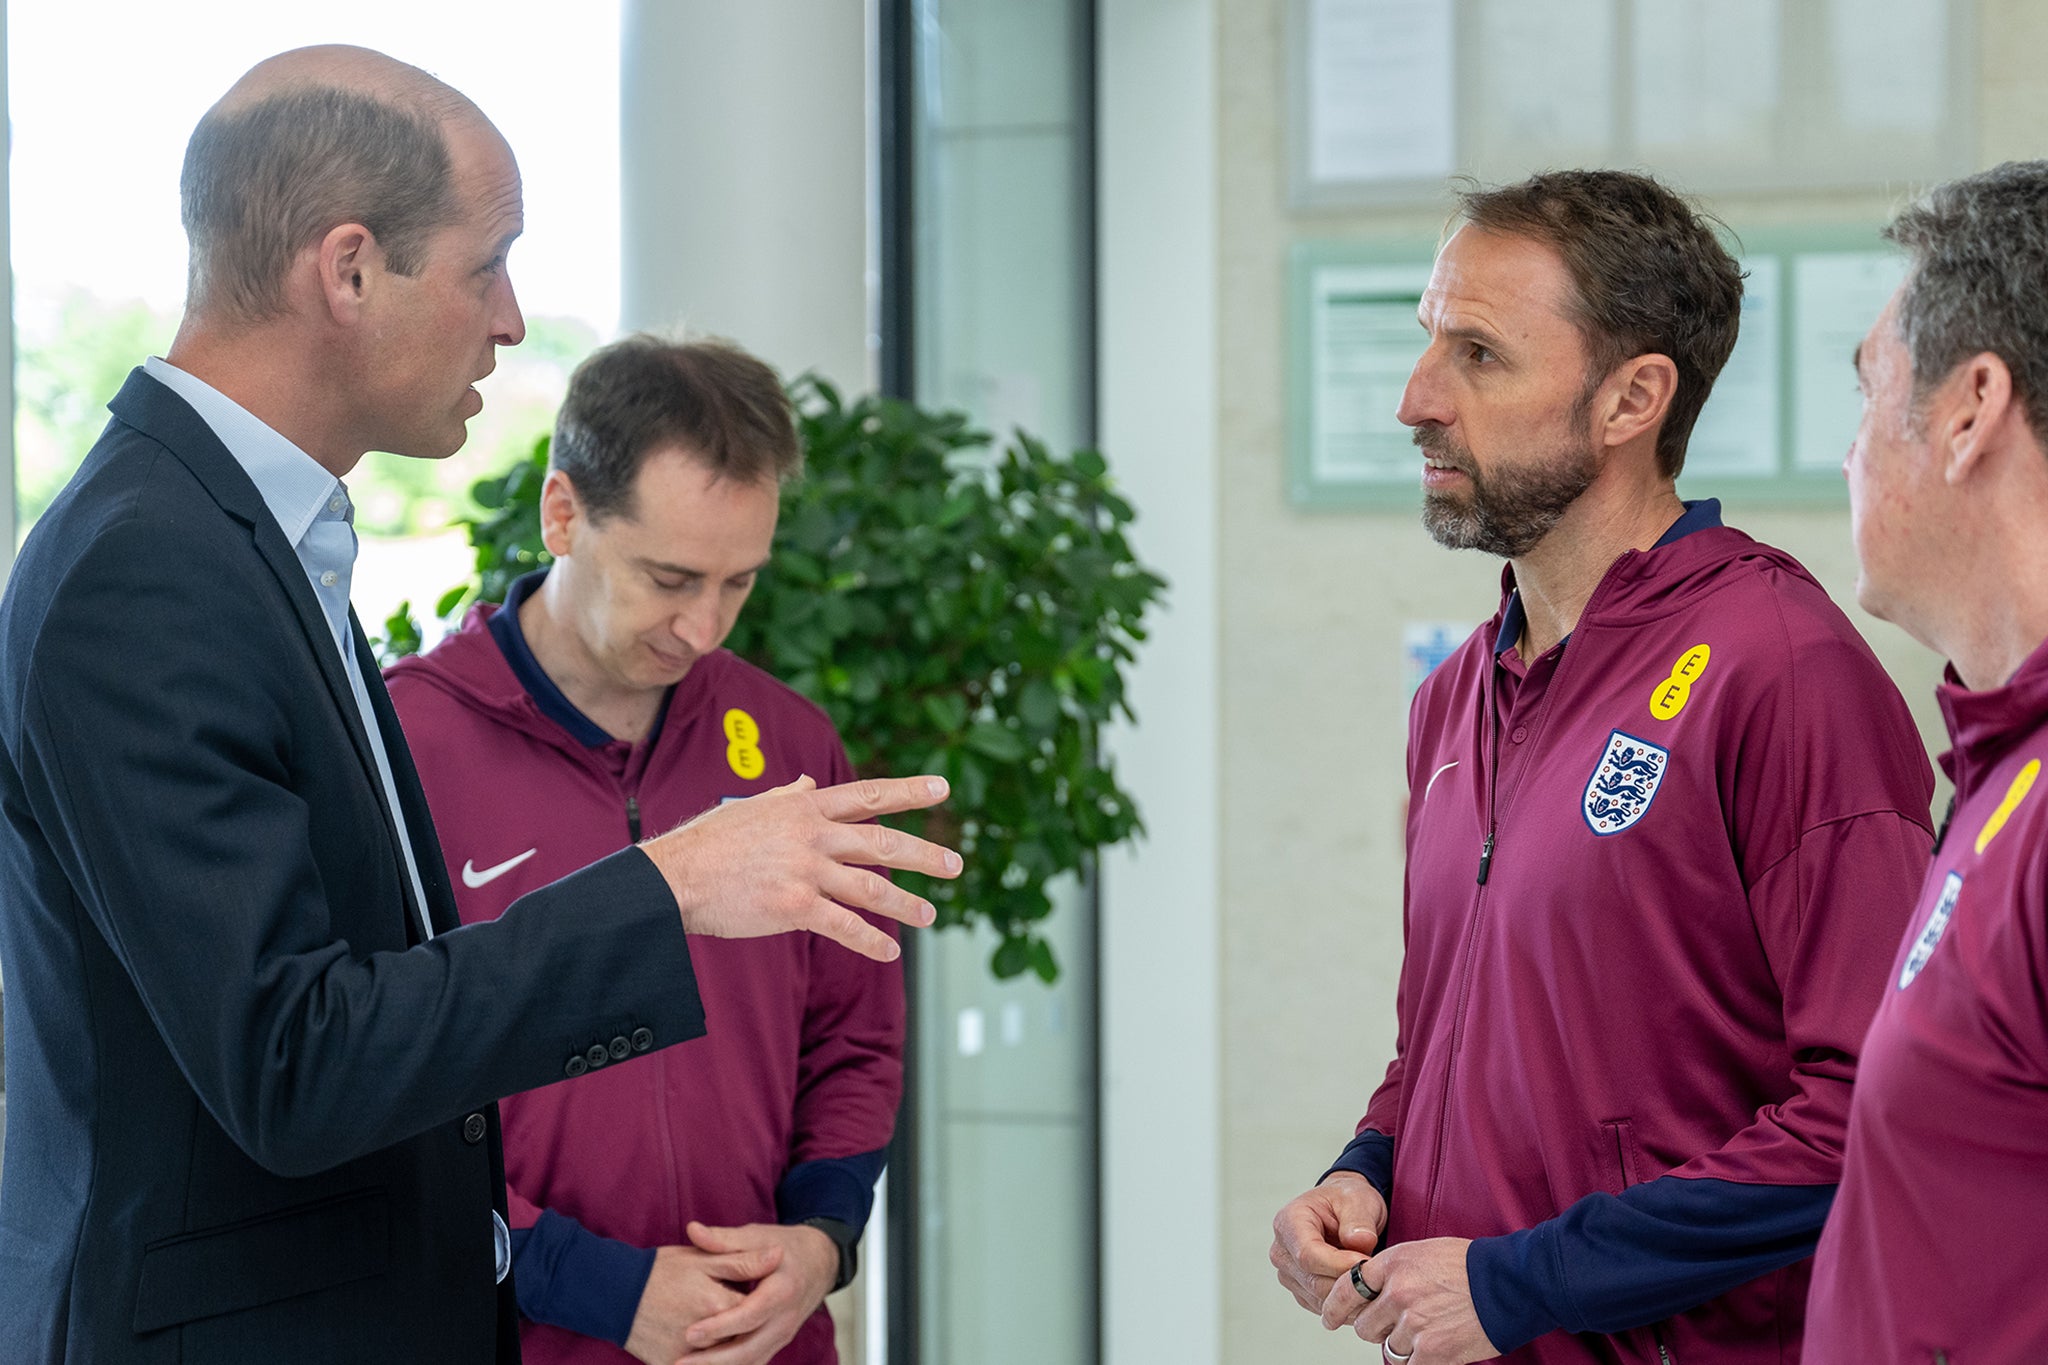 Prince William will be personally cheering on the England team in Germany today